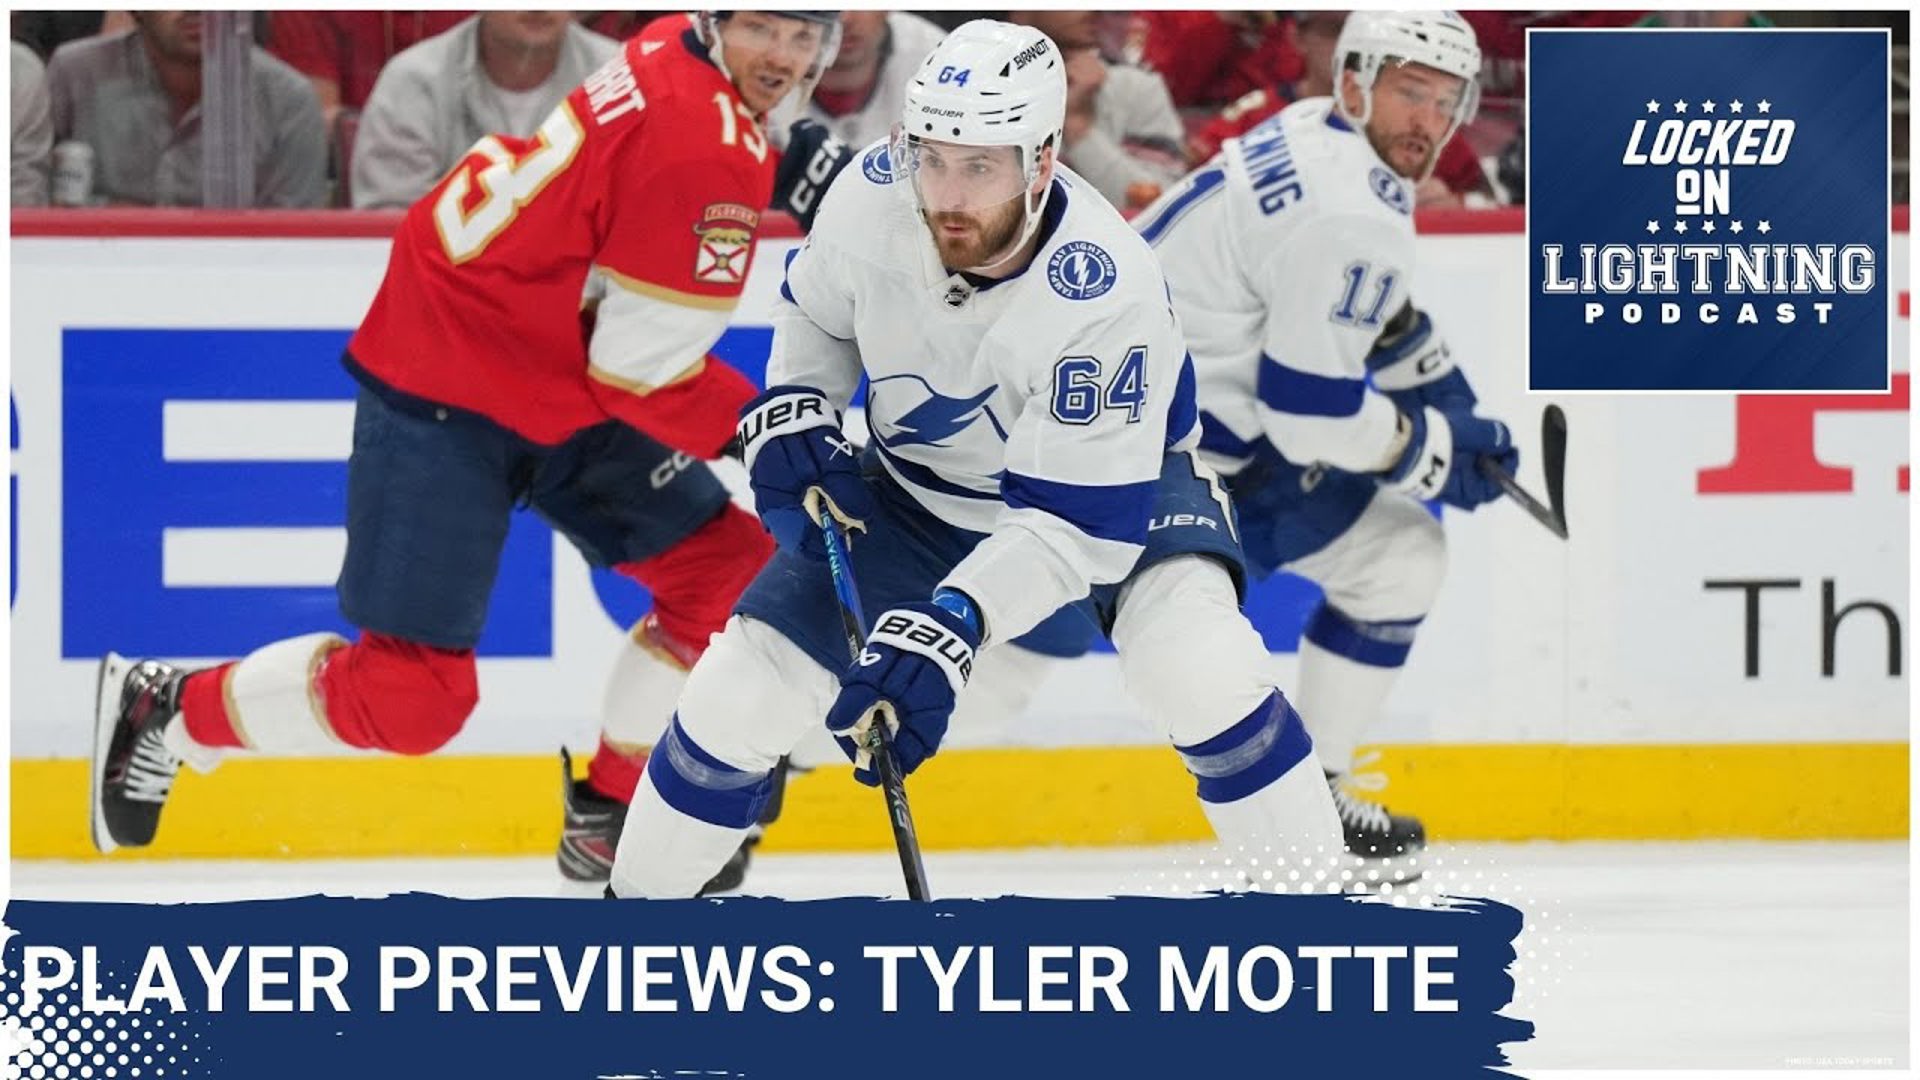 Tyler Motte had a less than memorable first season with the Lightning. Could it have been wrong lineups?